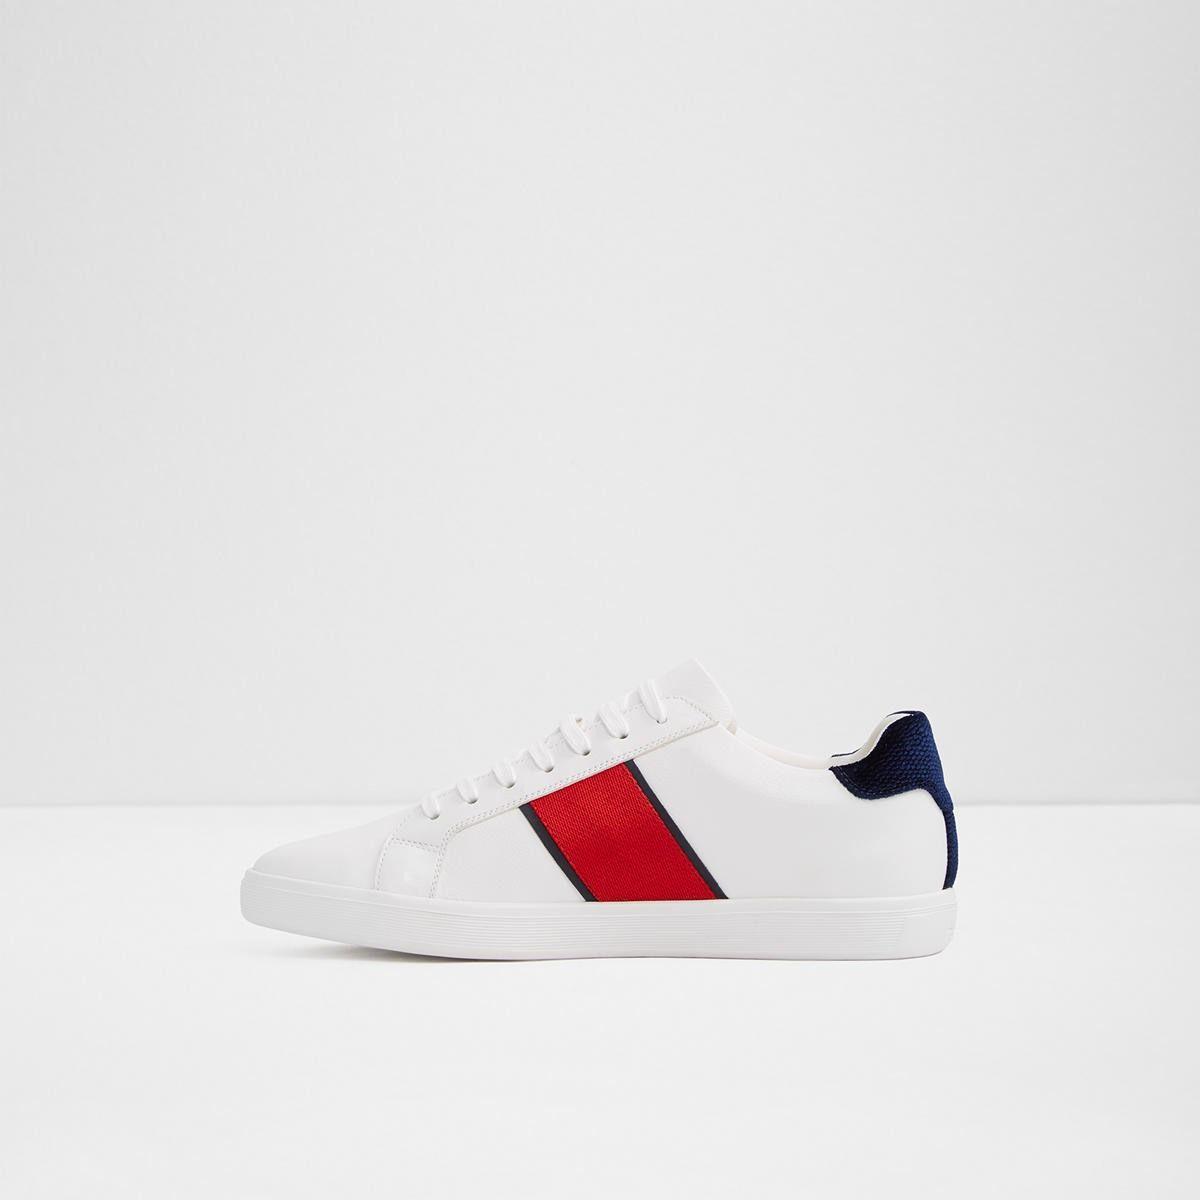 White and Red Shoe Logo - Cowien White Men's Sneakers. Aldoshoes.com US